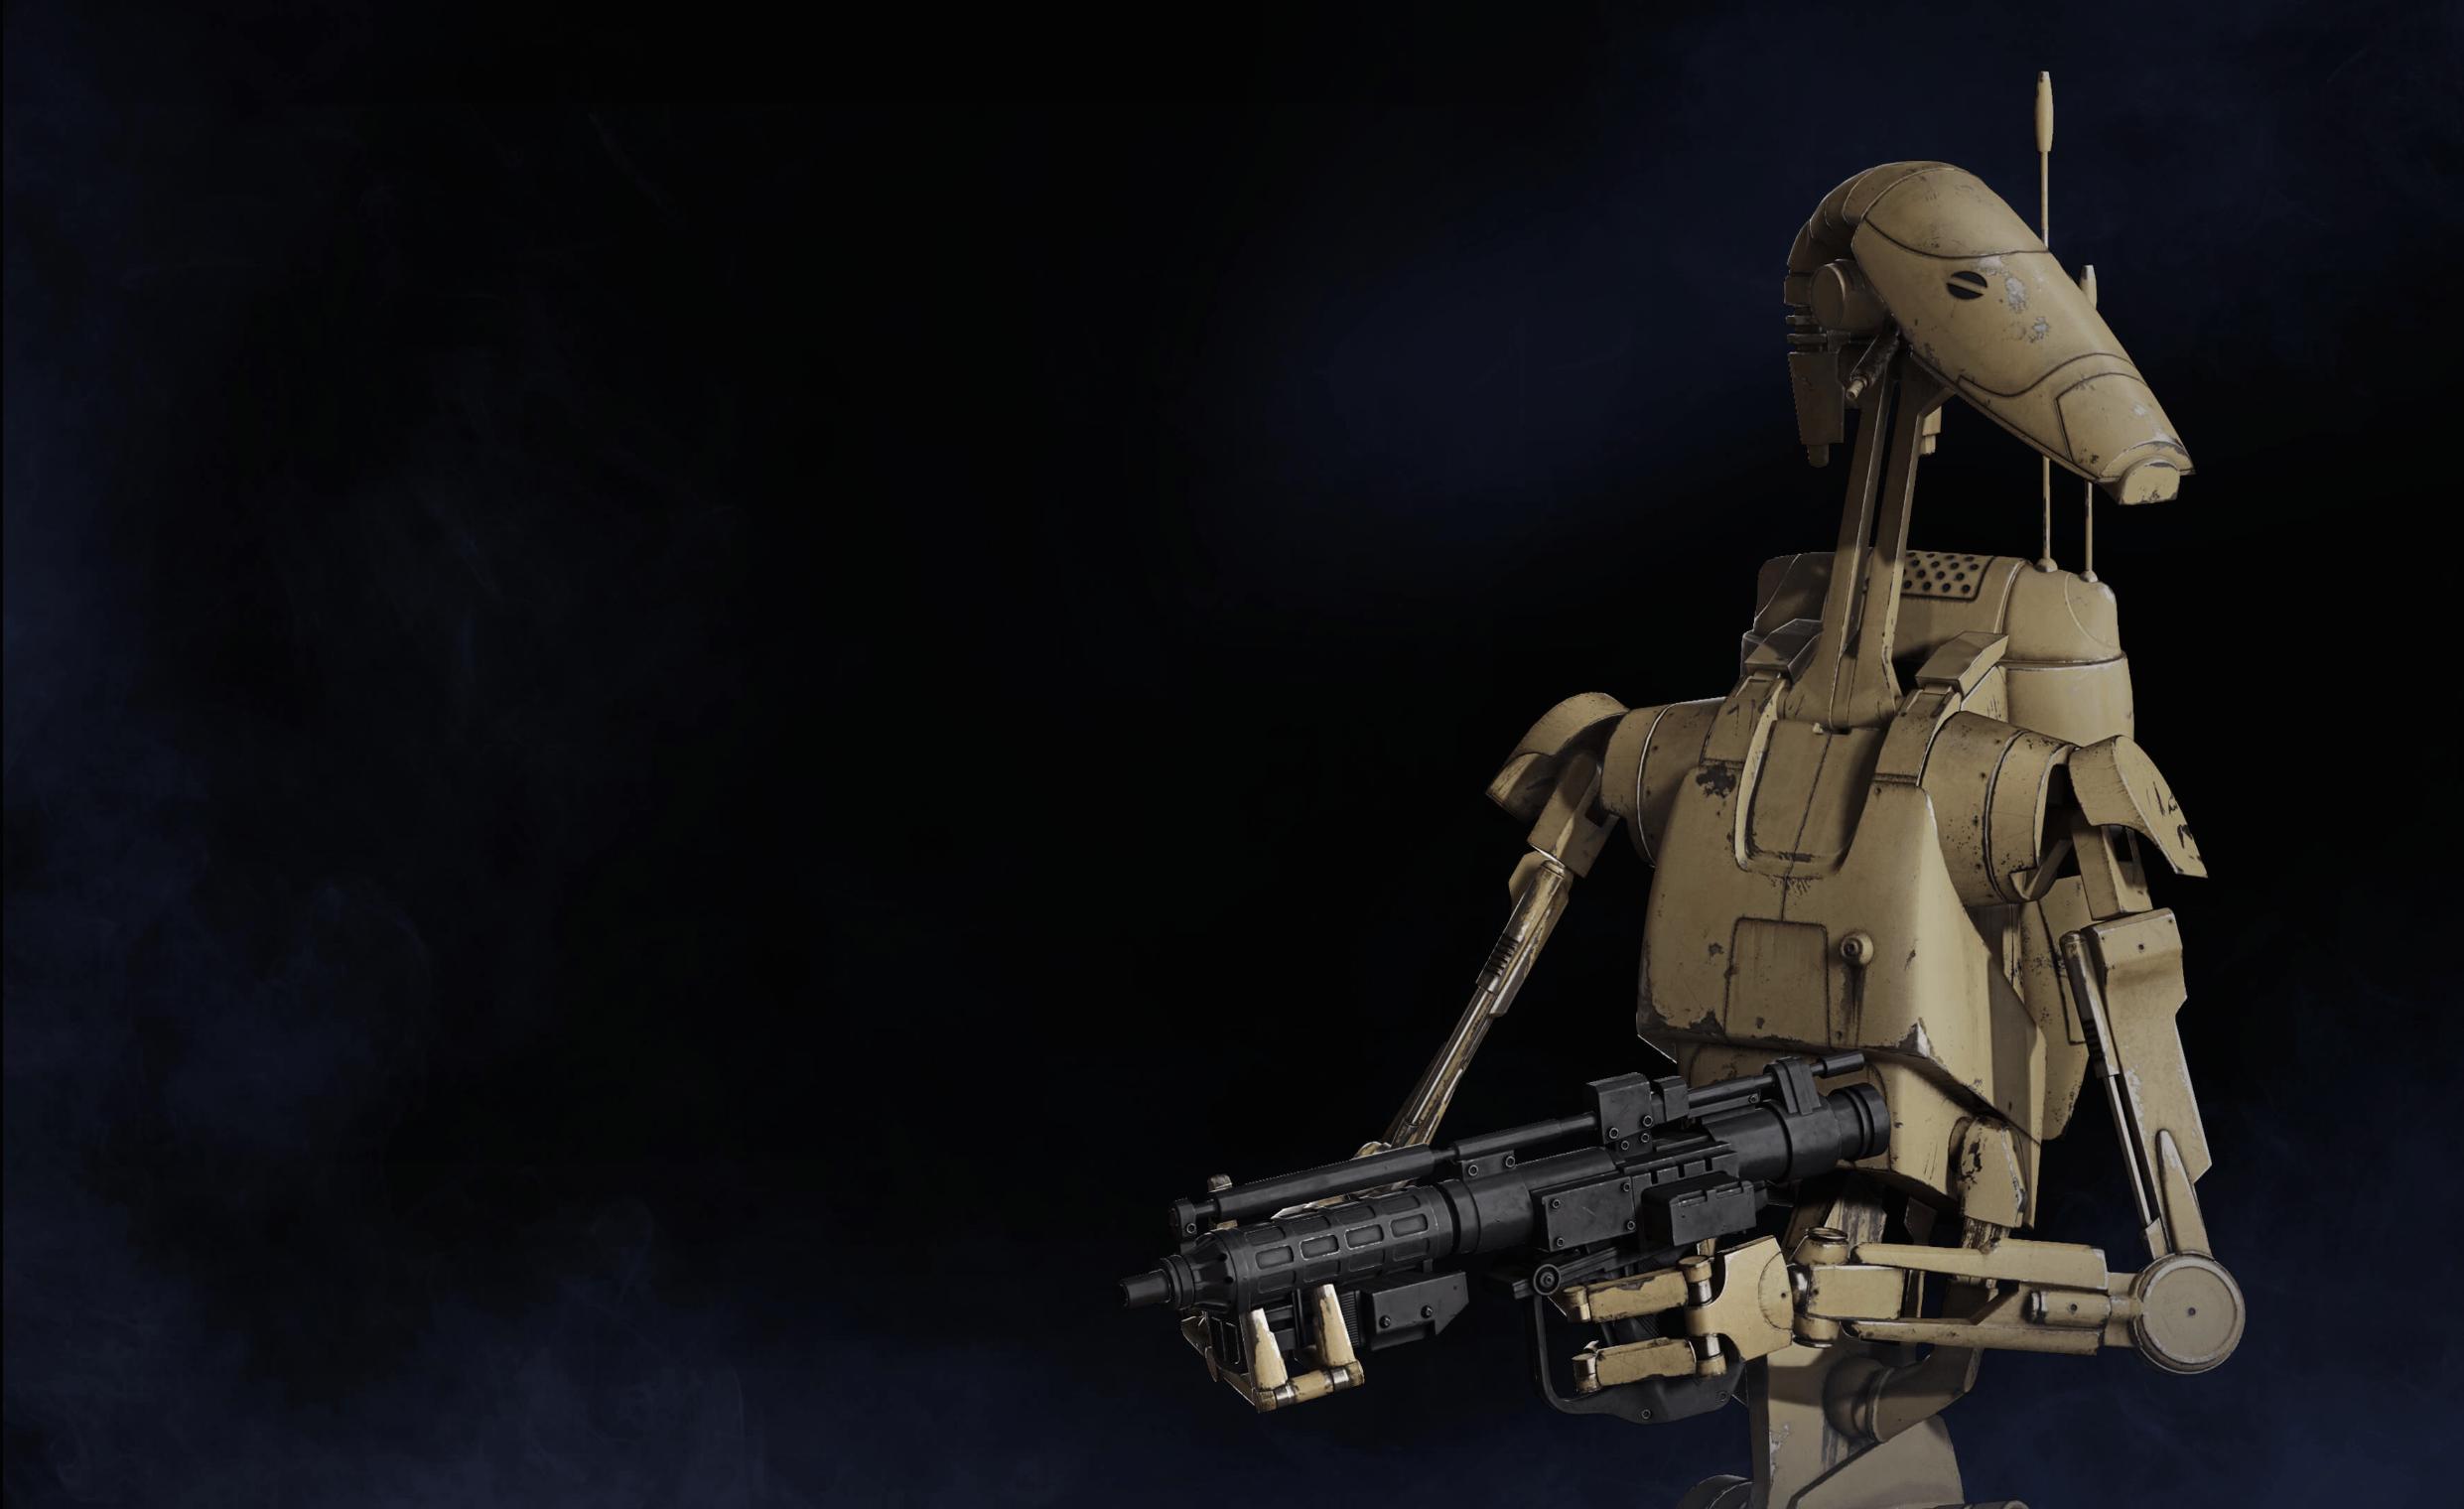 2482 x 1520 · png - Battle Droid Wallpapers - Wallpaper Cave